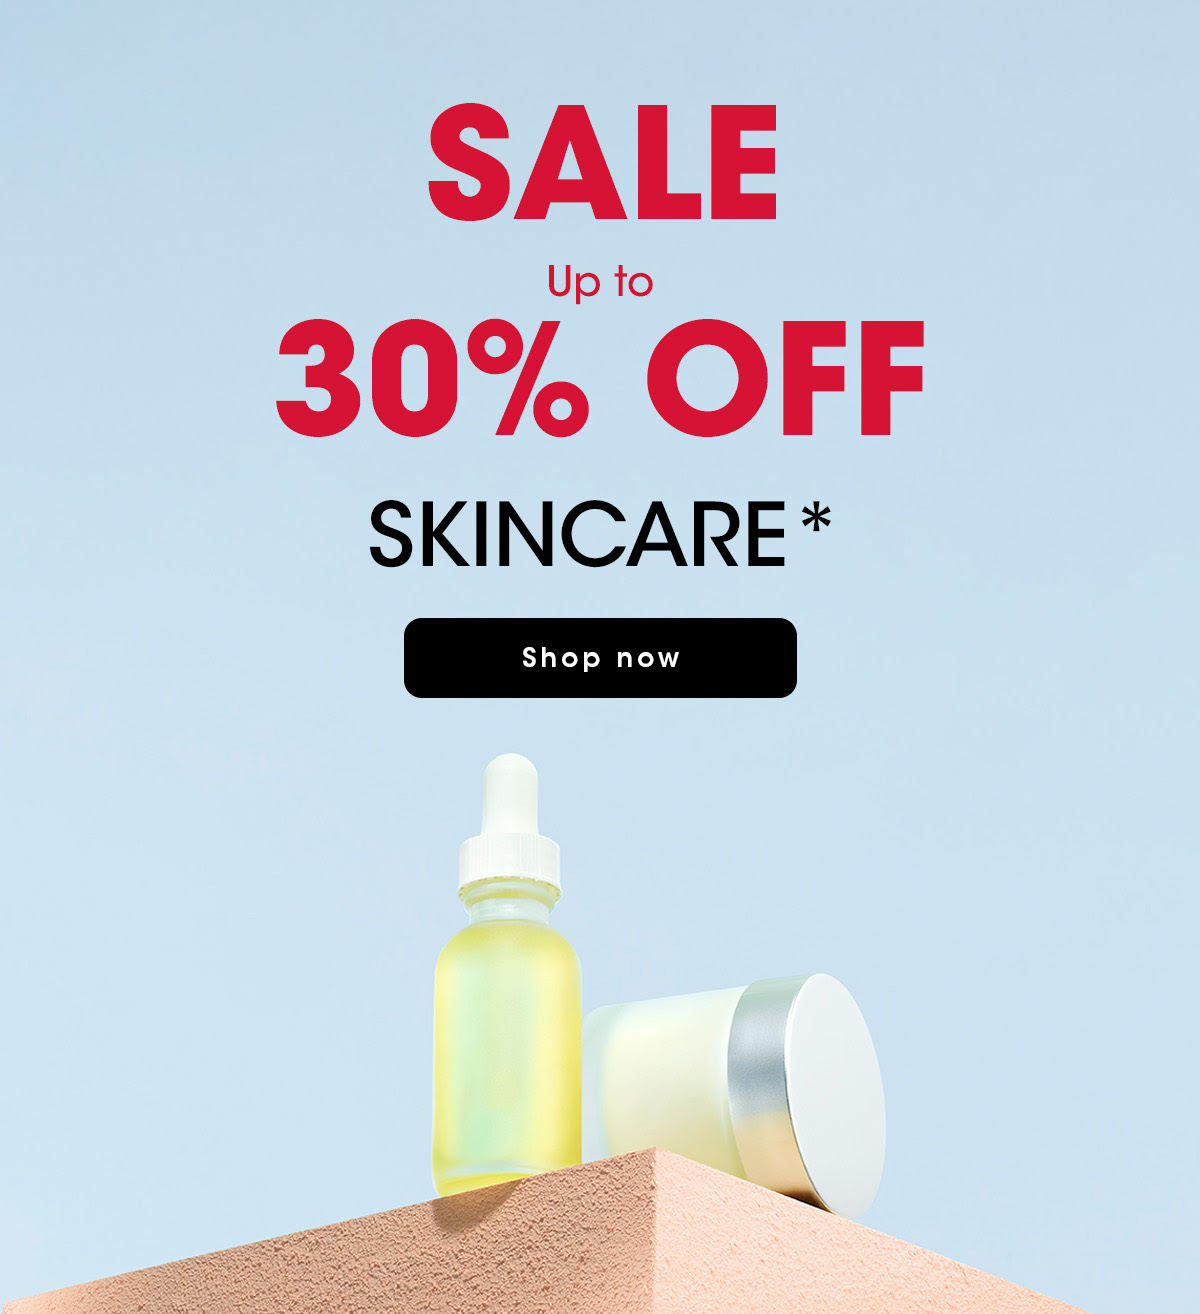 Up to 30% off Skincare at Sephora UK